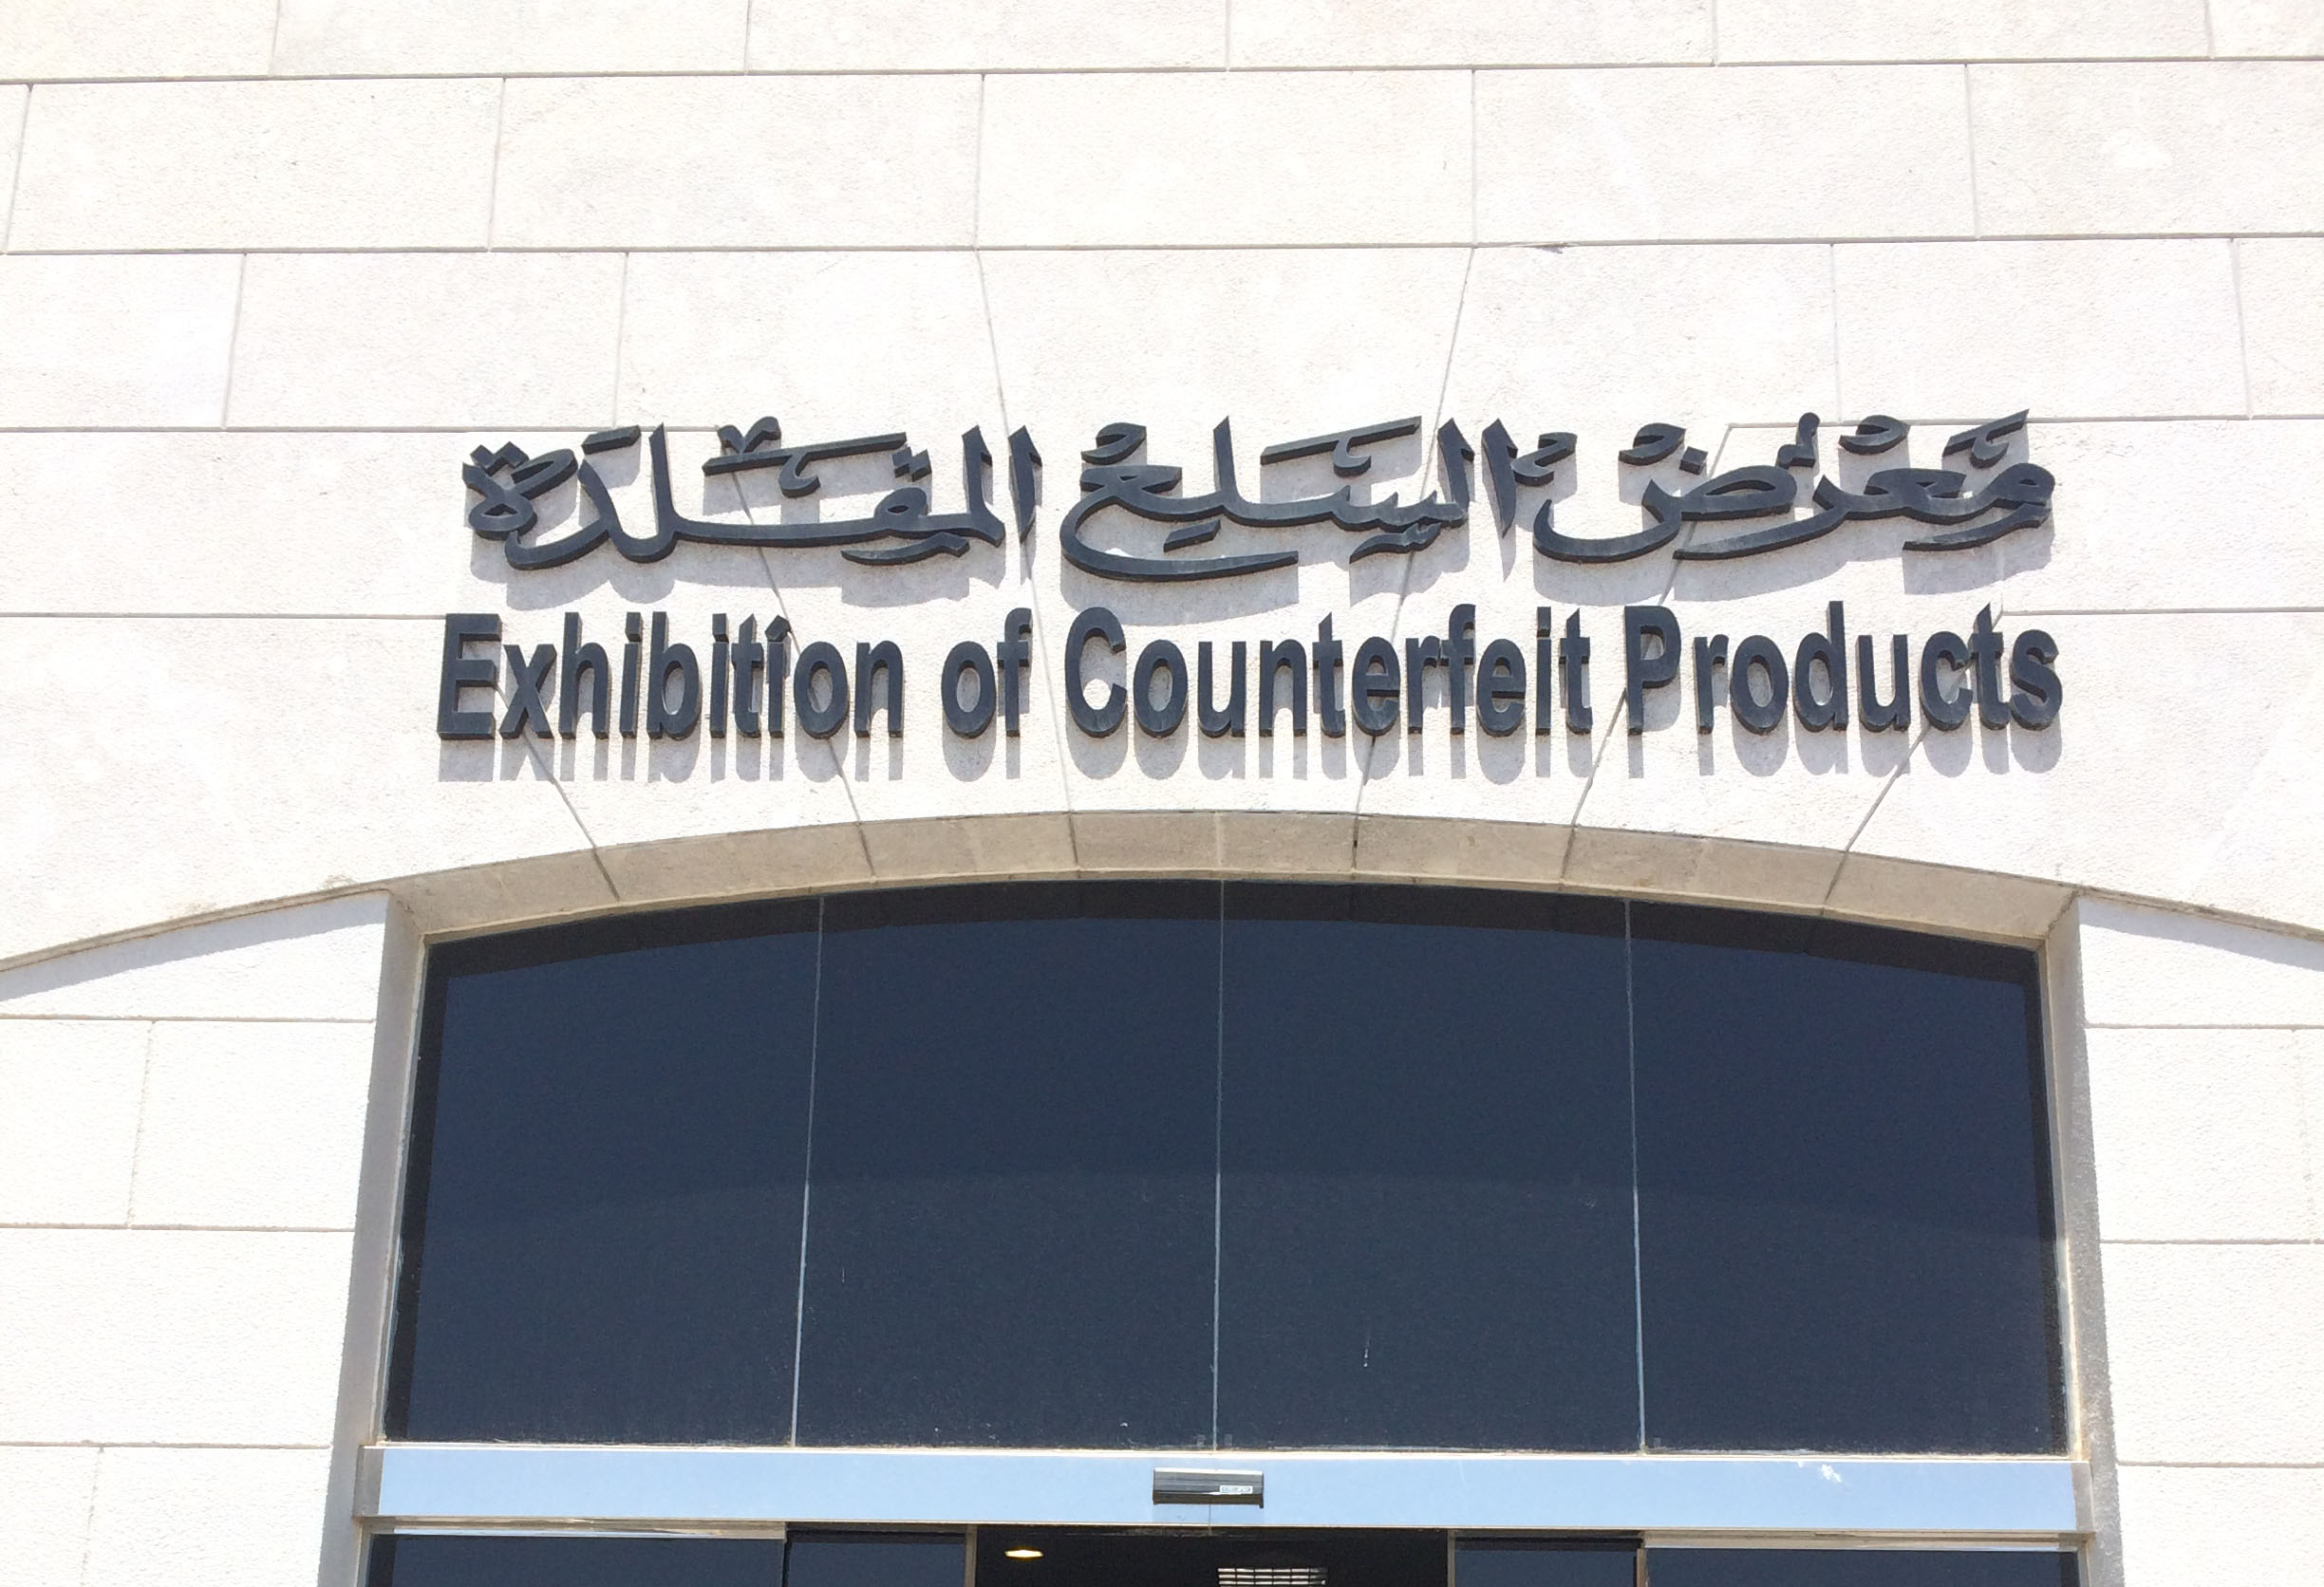 Gallery of phony goods throws light on Oman’s counterfeit industry